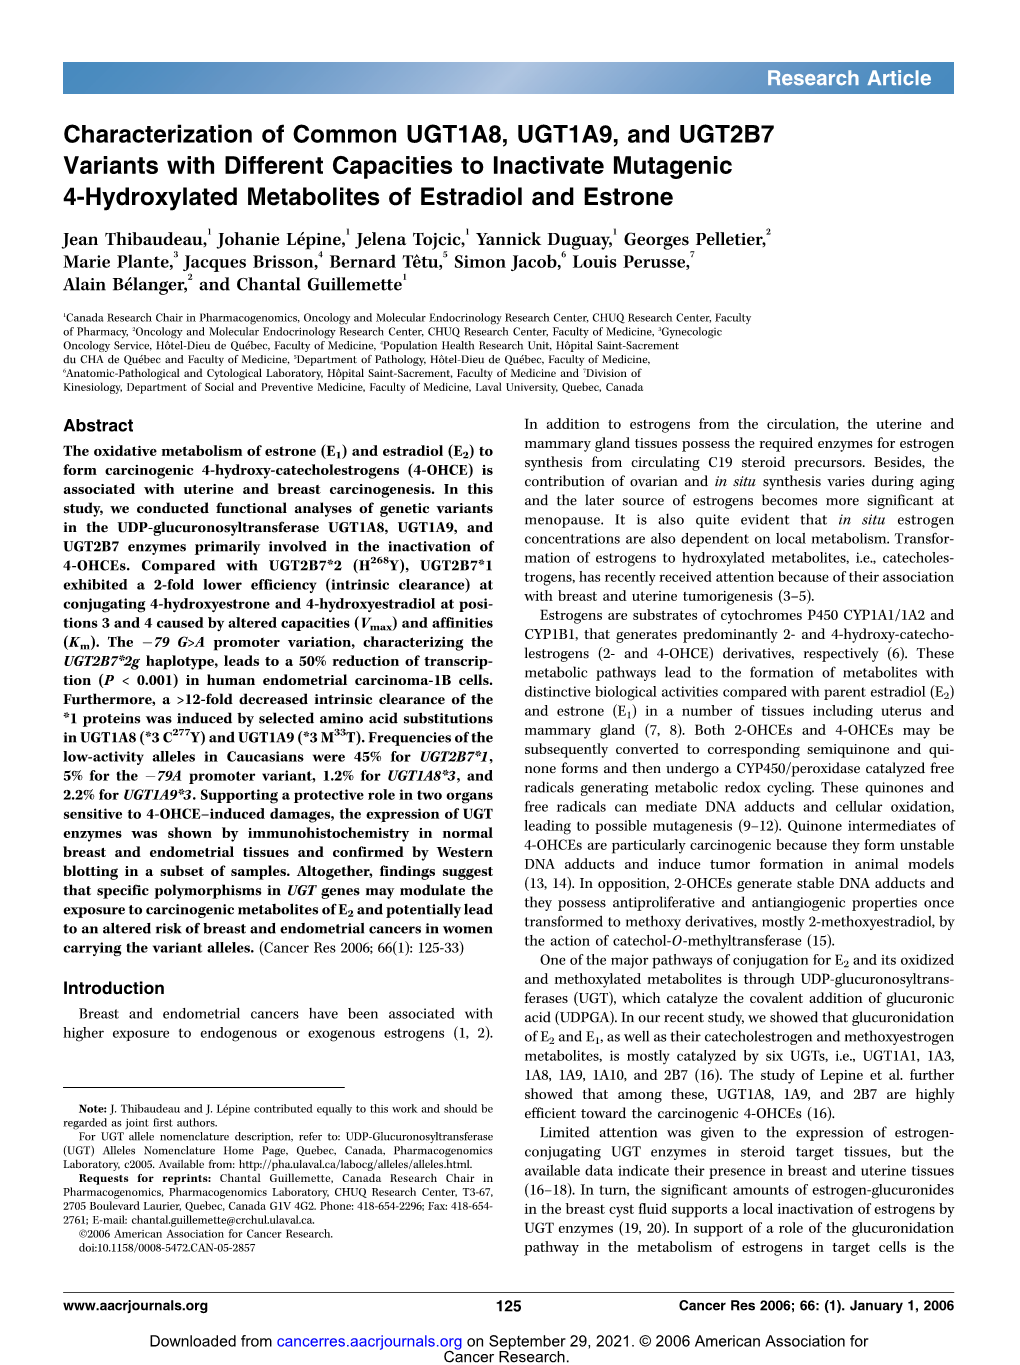 Characterization of Common UGT1A8, UGT1A9, and UGT2B7 Variants with Different Capacities to Inactivate Mutagenic 4-Hydroxylated Metabolites of Estradiol and Estrone